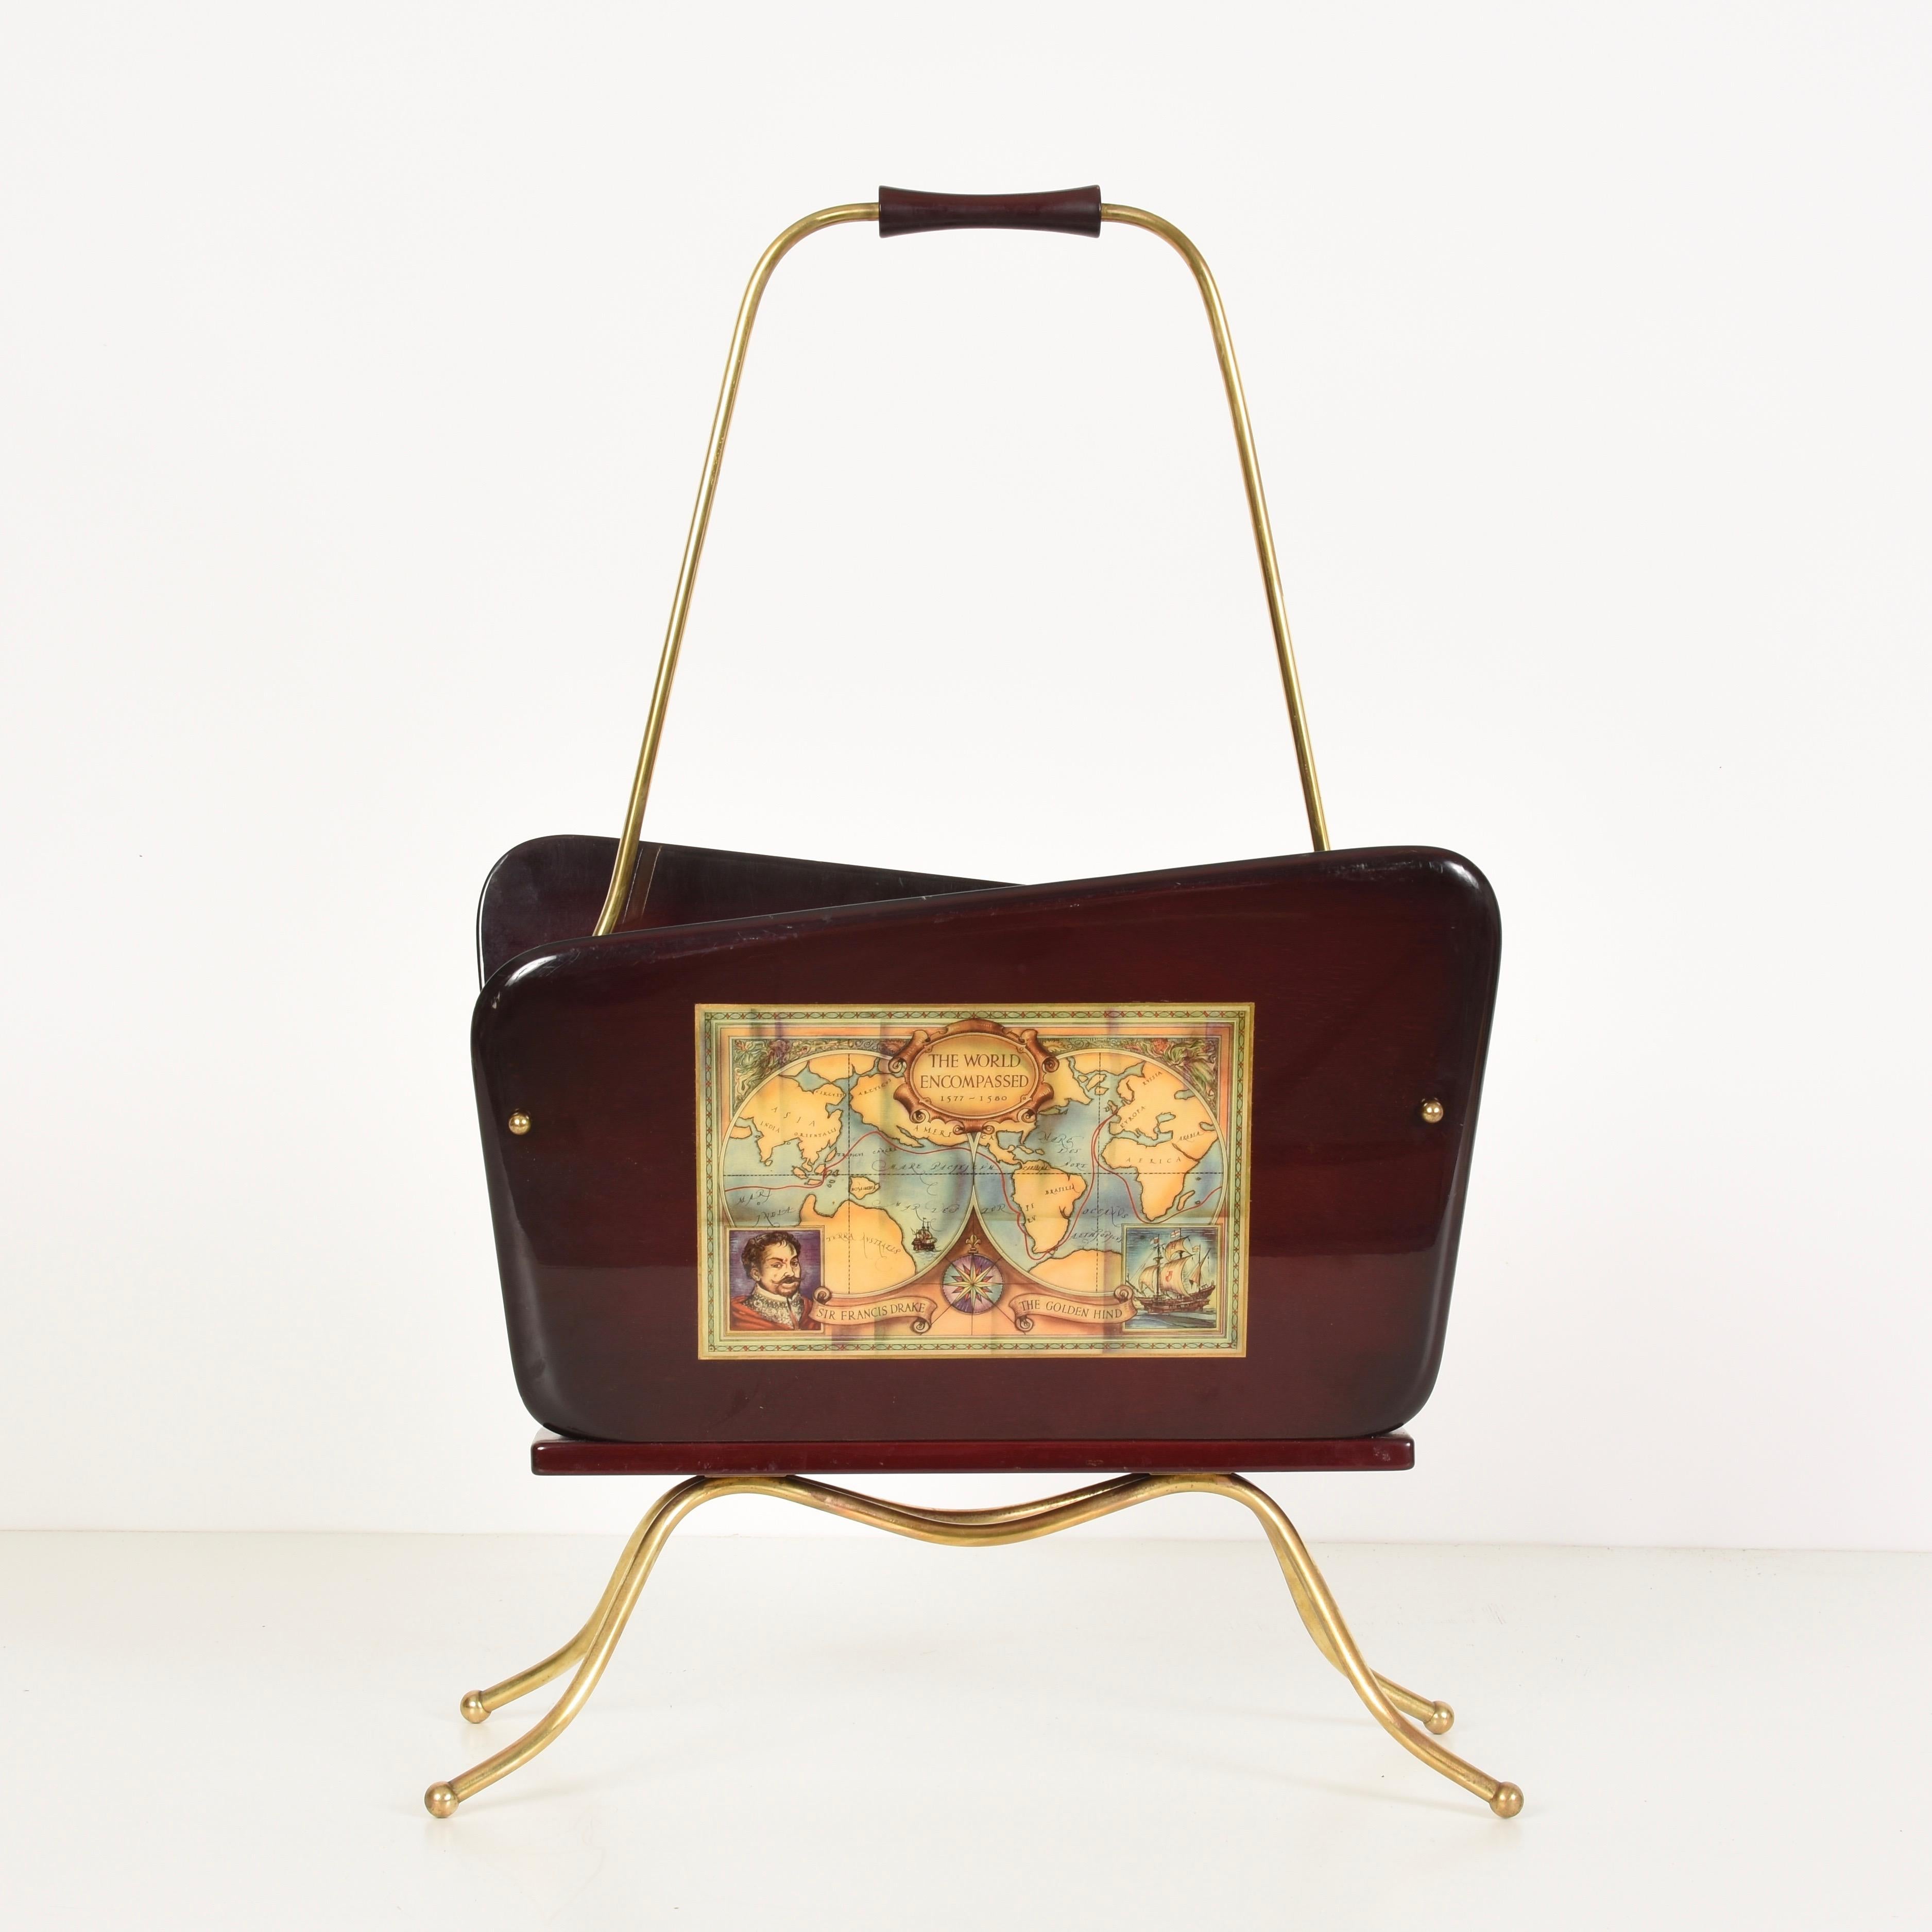 Gio Ponti Midcentury Wood and Brass Italian Magazine Rack with Handle, 1950s For Sale 2